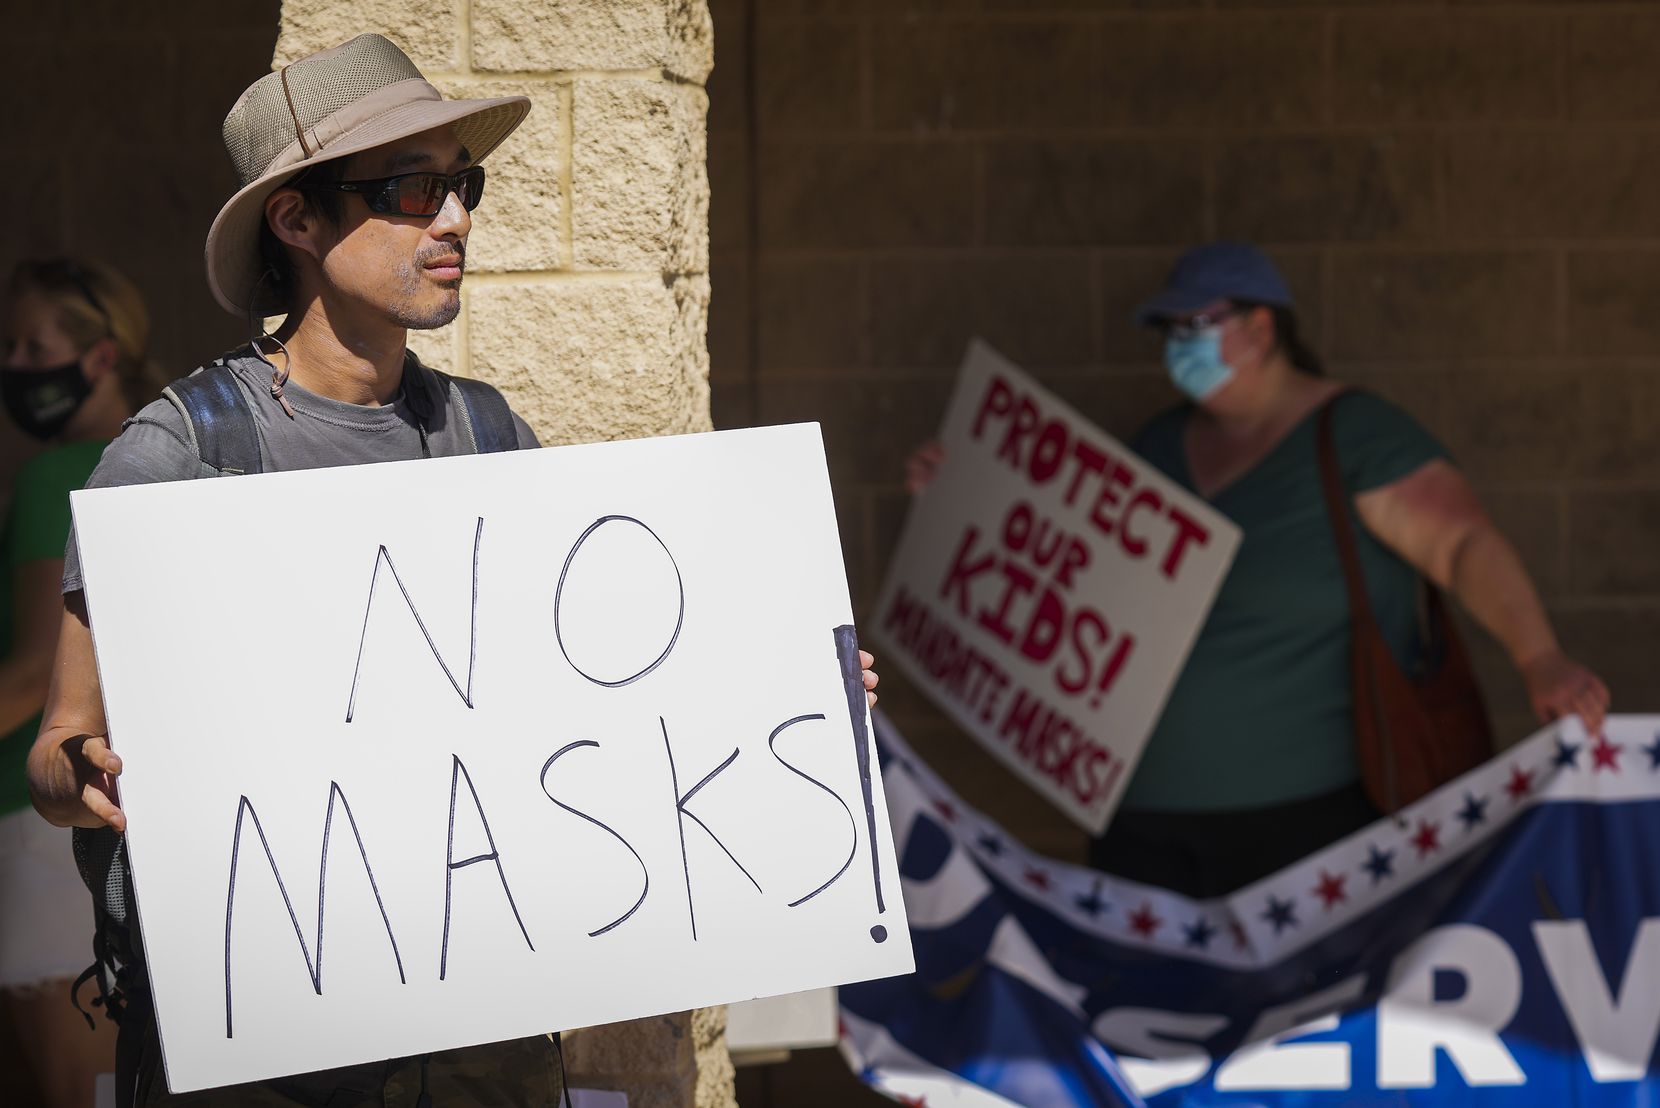 Opponents and supporters of mask mandates rallied outside before a Carroll ISD board meeting in August.